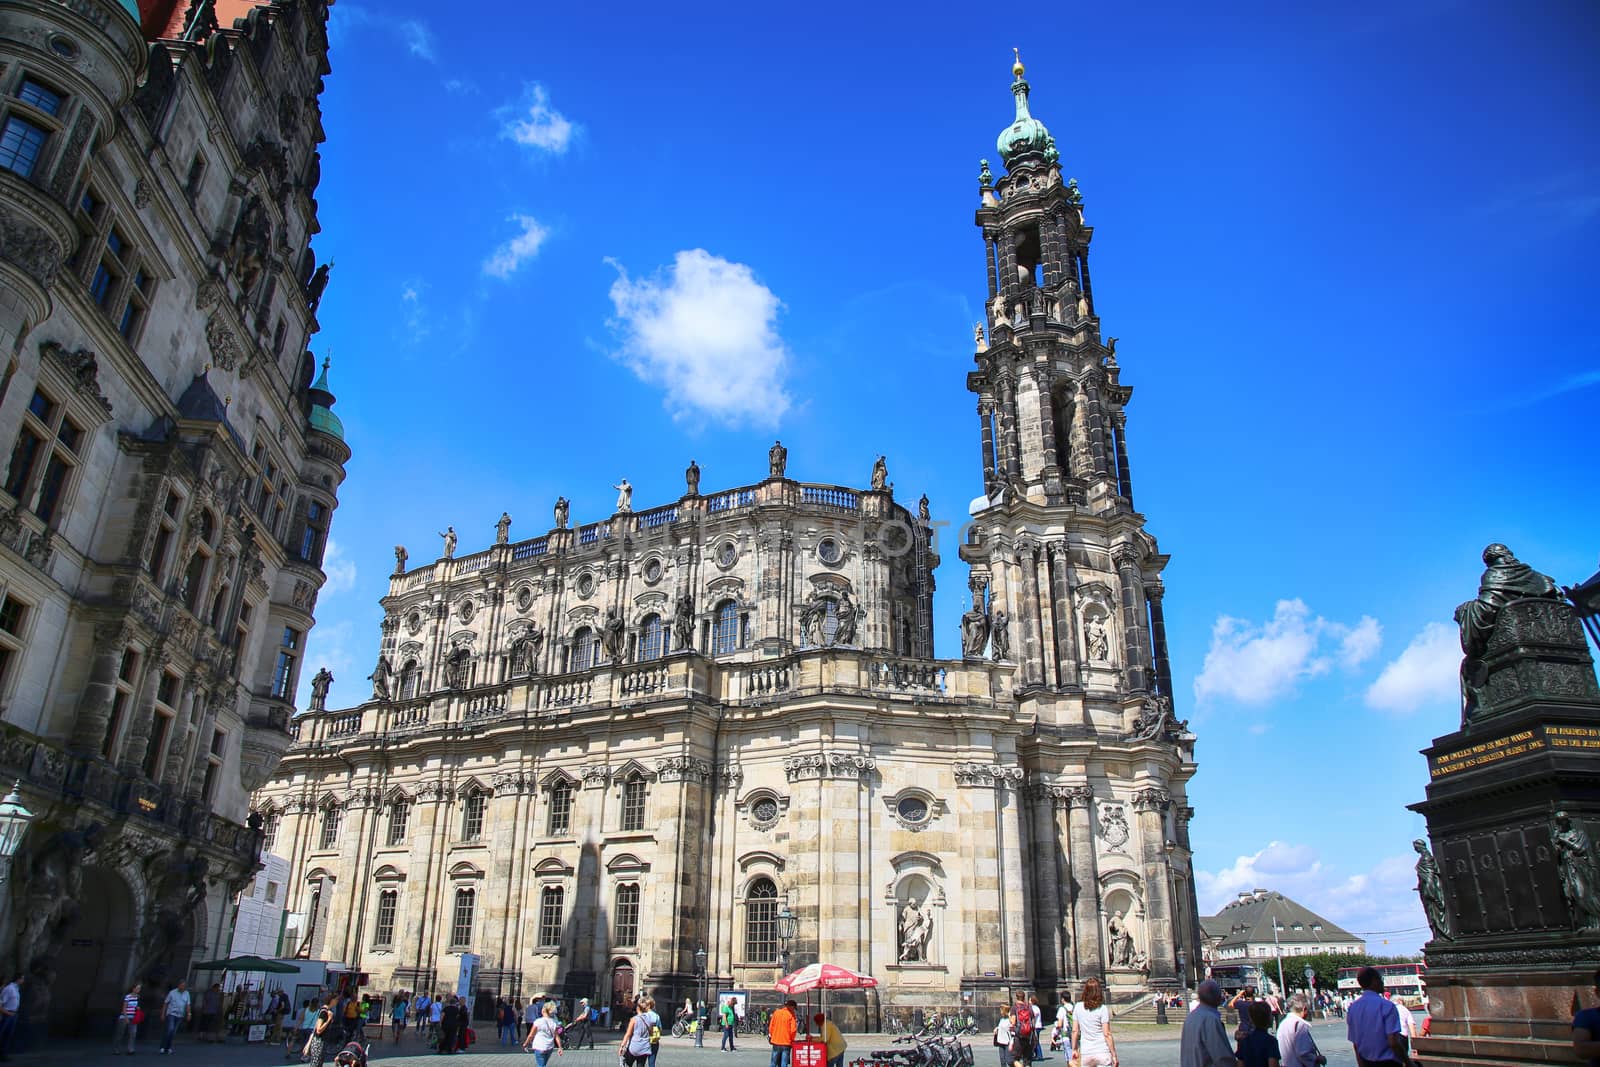 DRESDEN, GERMANY – AUGUST 13, 2016: Tourists walk and visit on Schlossplatz, majestic view on Katholische Hofkirche in Dresden, State of Saxony, Germany on August 13, 2016.